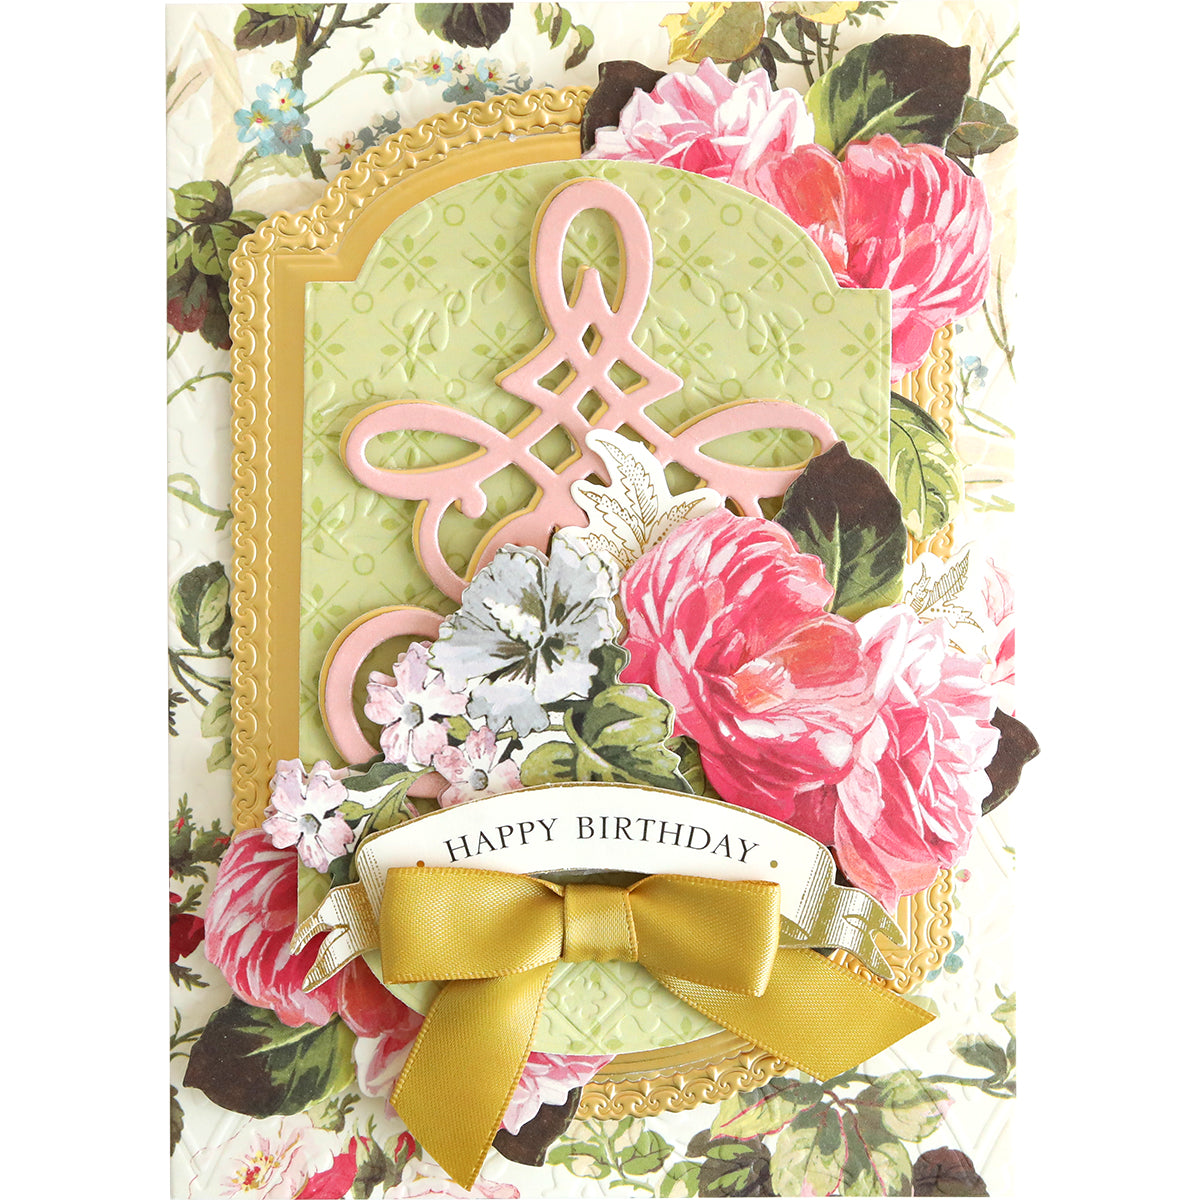 A Flourish Die Bundle adorned with decorative details like flowers and a bow.